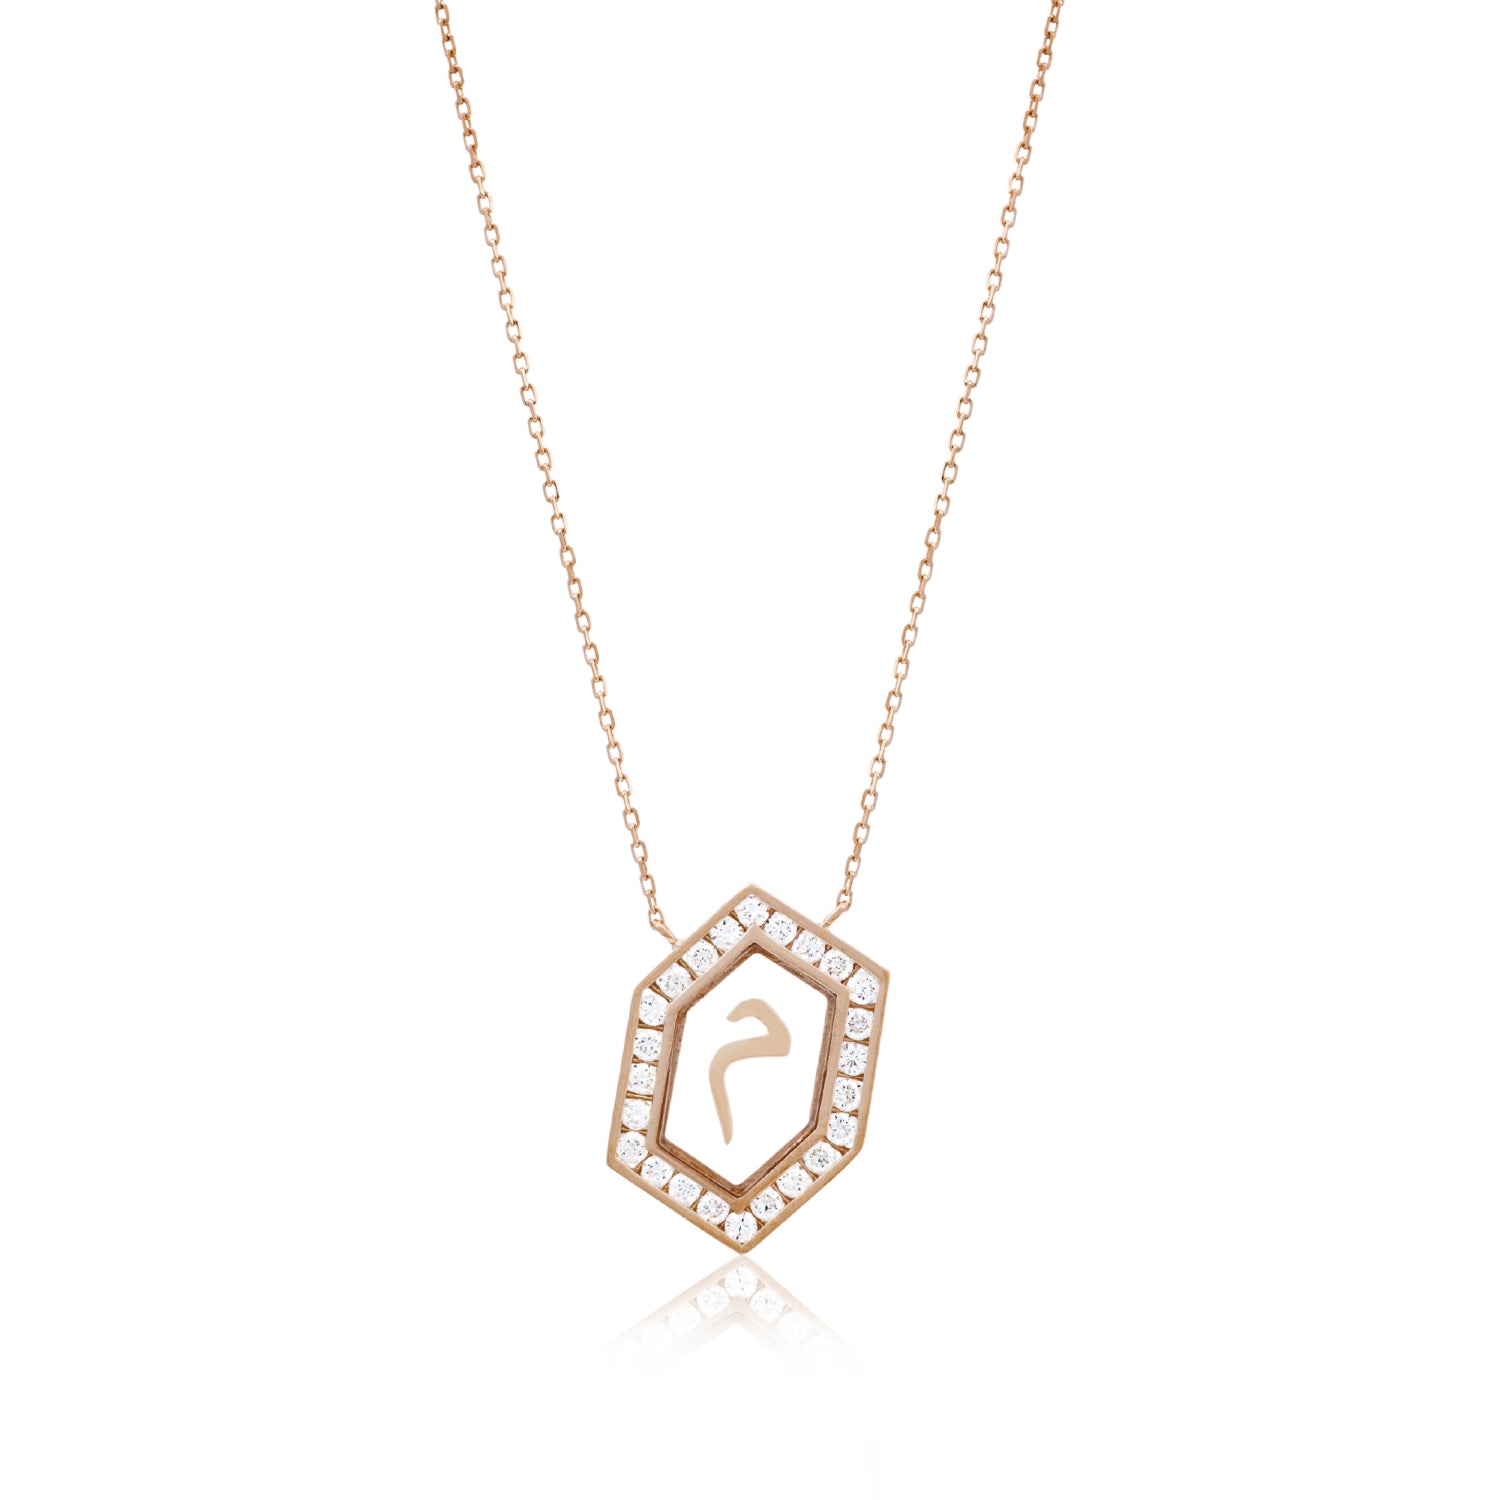 Qamoos 1.0 Letter م Diamond Necklace in Rose Gold